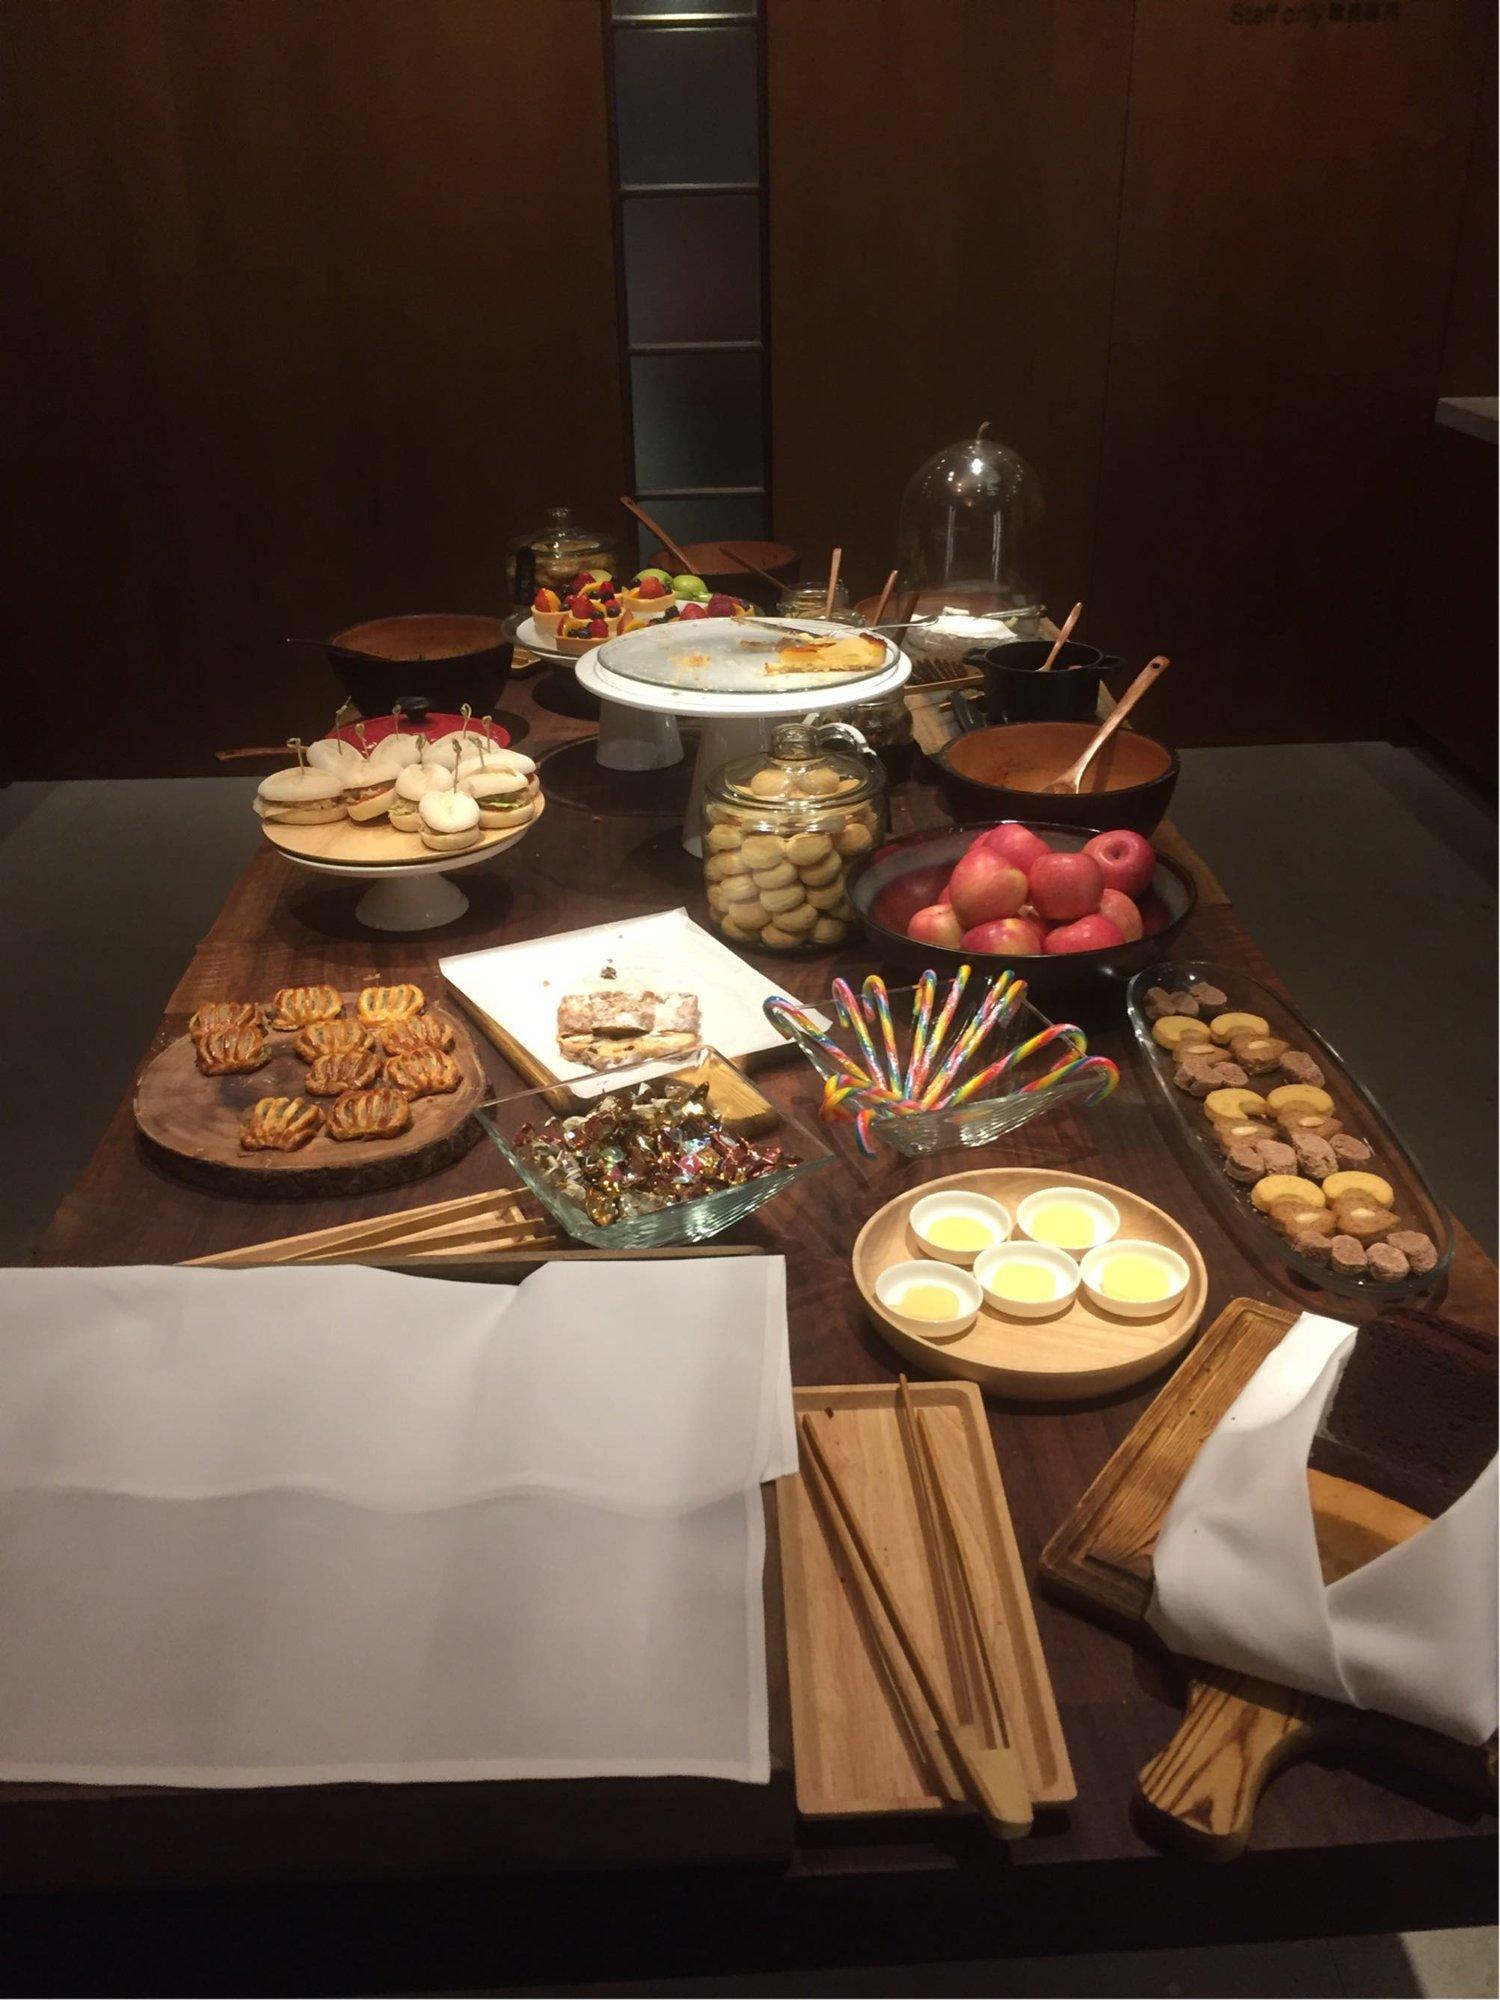 Cathay Pacific The Pier First Class Lounge image 7 of 100